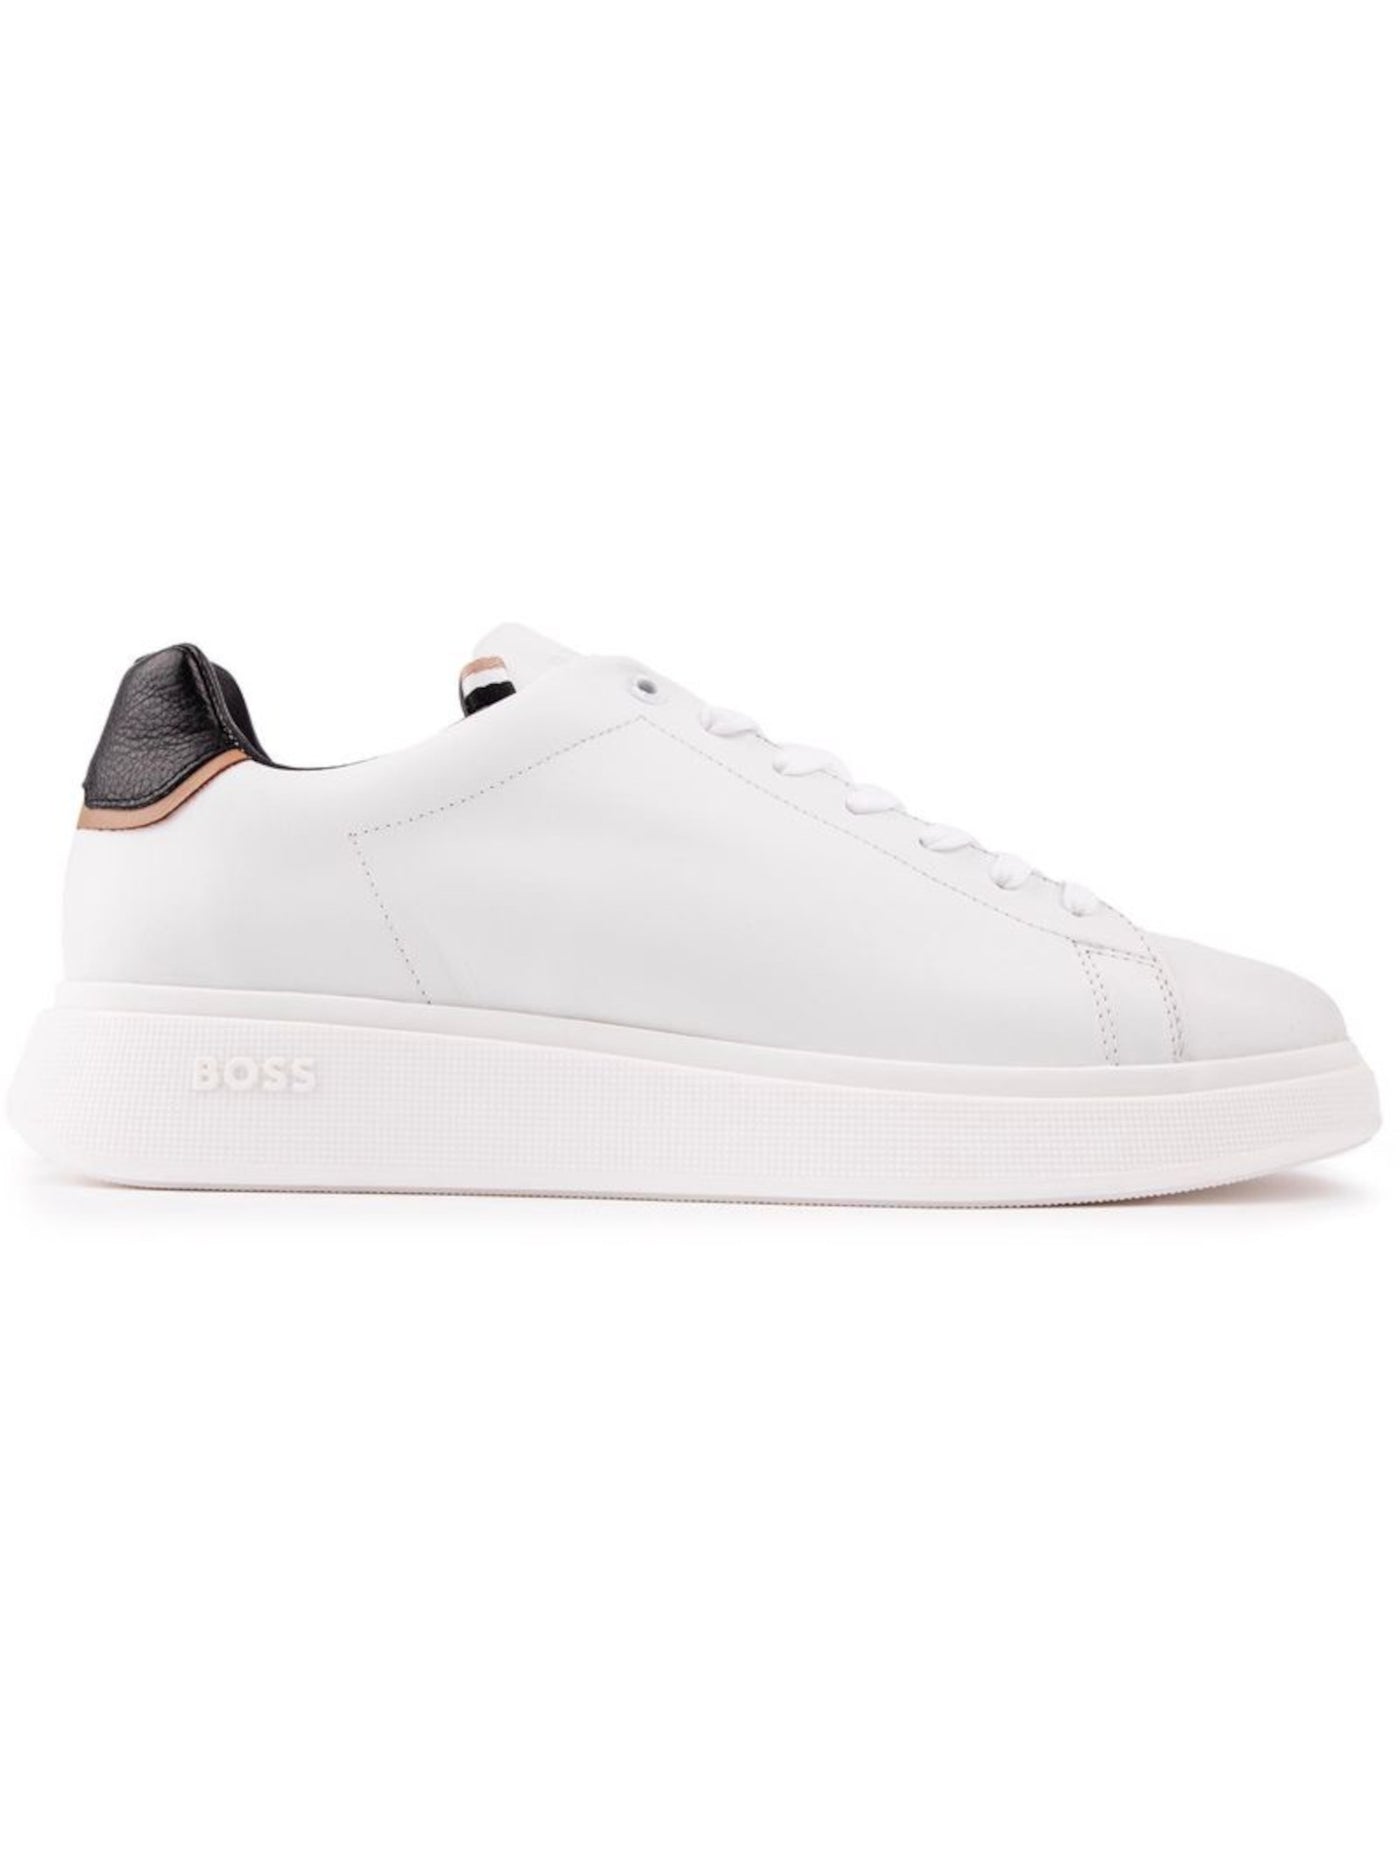 BOSS Mens White Logo Padded Bulton Round Toe Wedge Lace-Up Leather Sneakers Shoes 10